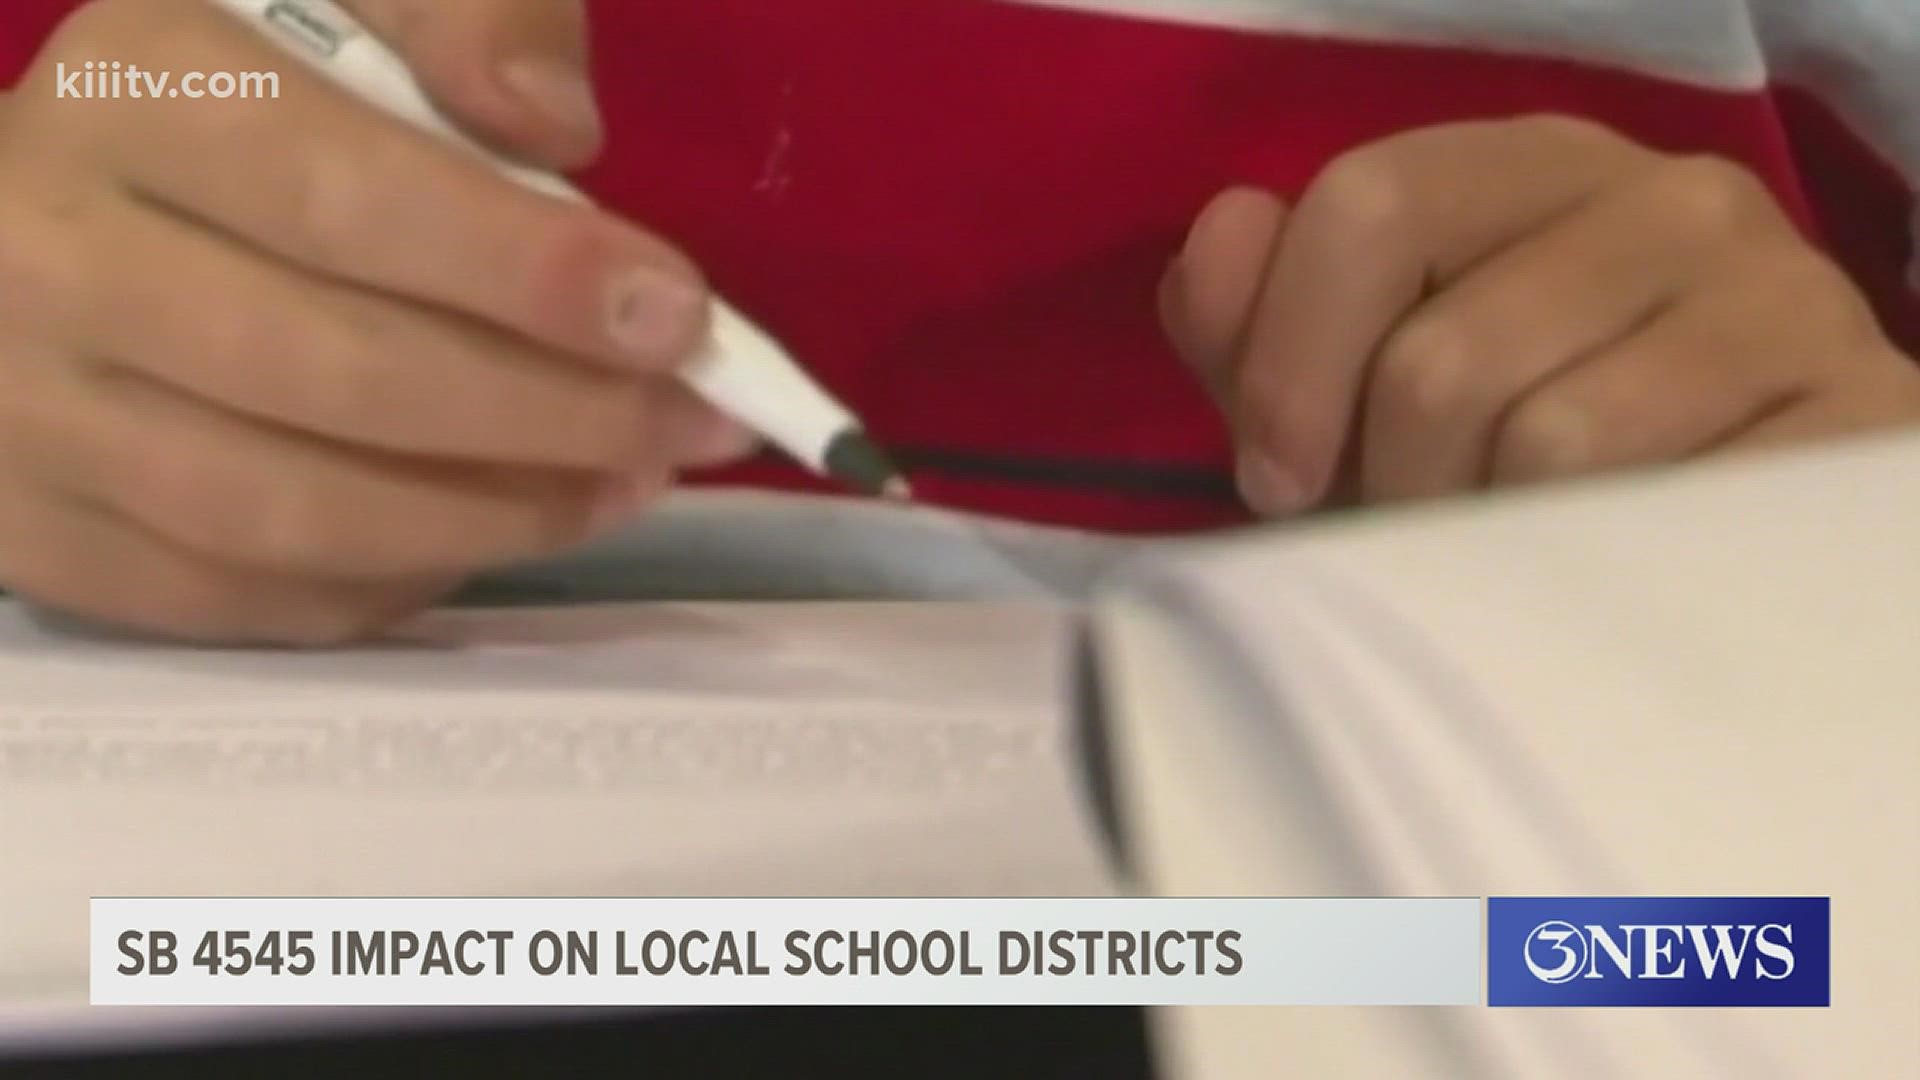 3News spoke with the Corpus Christi Independent School district on what parents need to know about House Bill 4545 and how it impacts students.